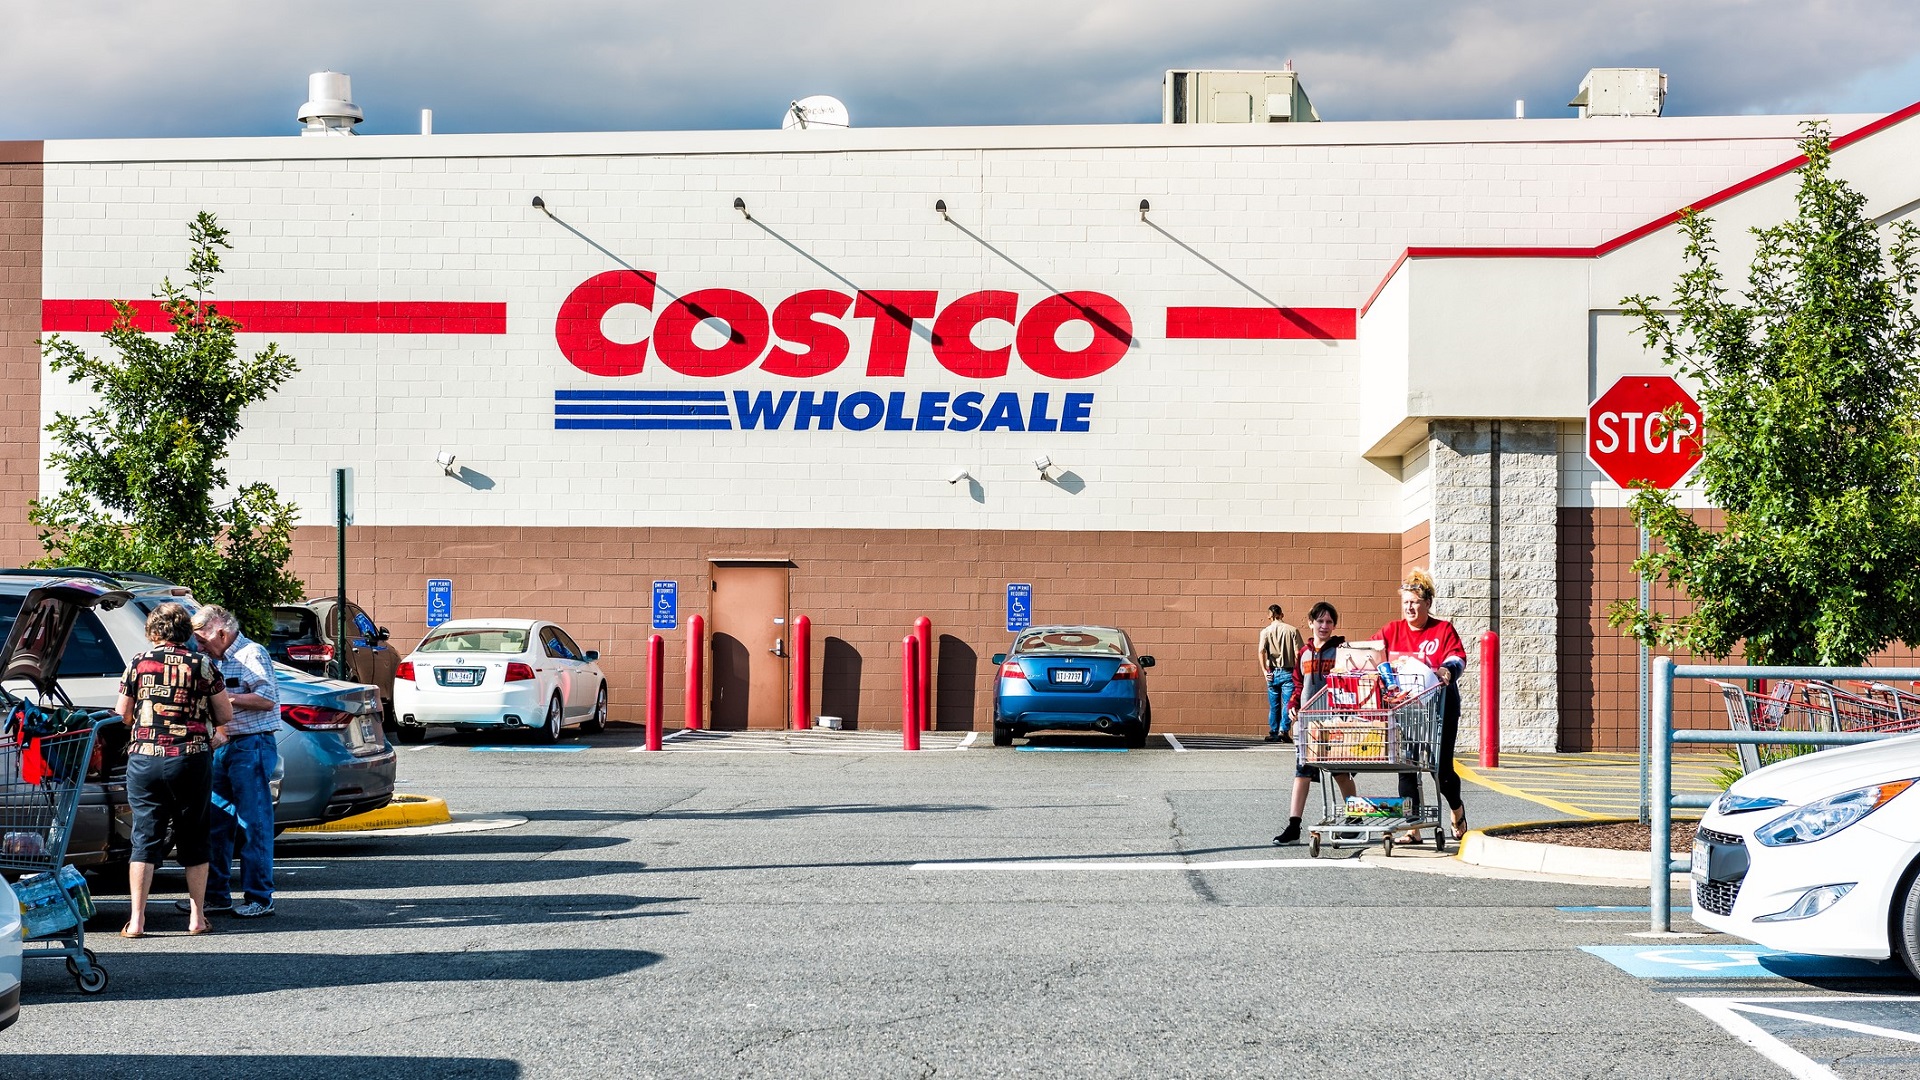 9 costco bulk food items that are cheaper than takeout